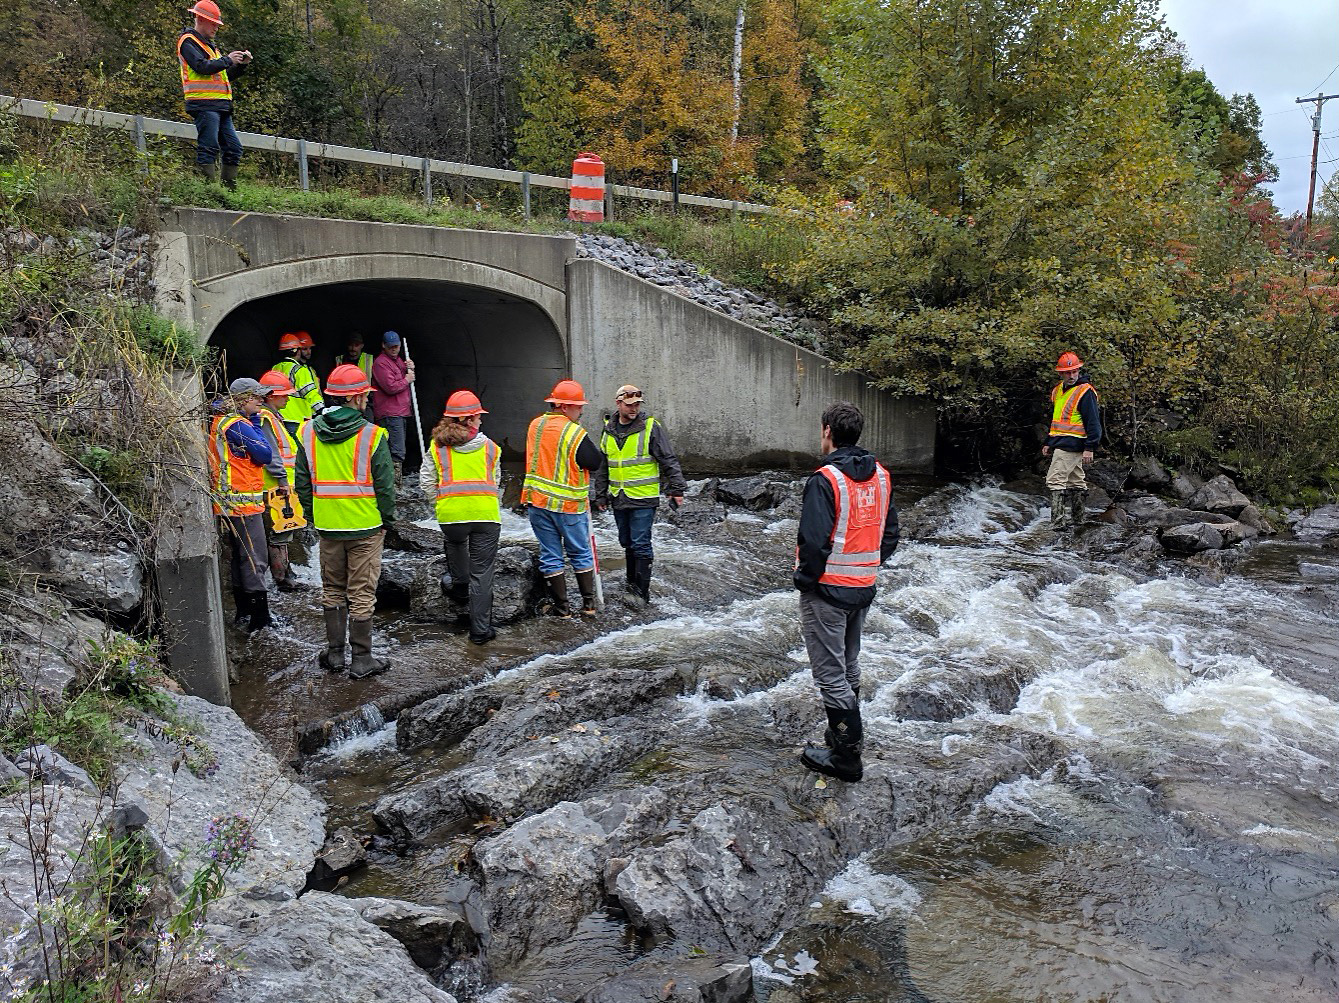 People in wading boots, hard hats, and safety vests stand in a rocky streambed where it exits a culvert.